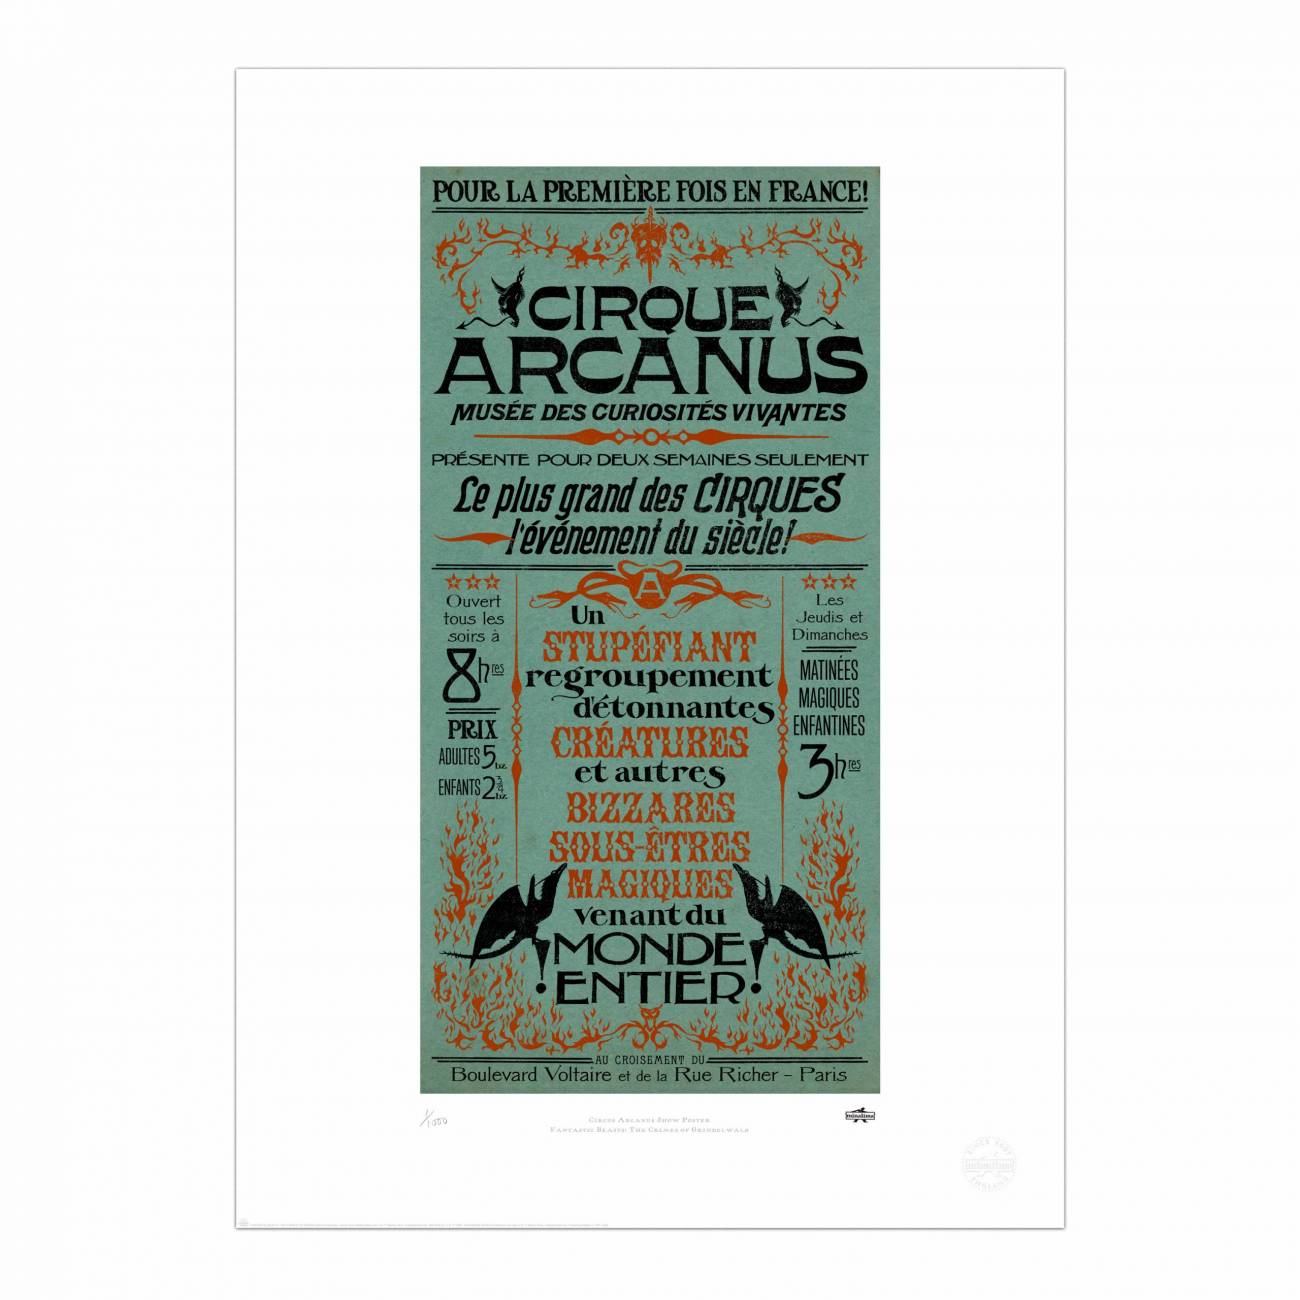 MinaLima - <b>Edition of 250 Our Premium Print is embellished with orange foil, comes with a Certificate of Authenticity, is numbered, embossed and signed by Miraphora and Eduardo printed on Hahnemühle fine art paper.</b>